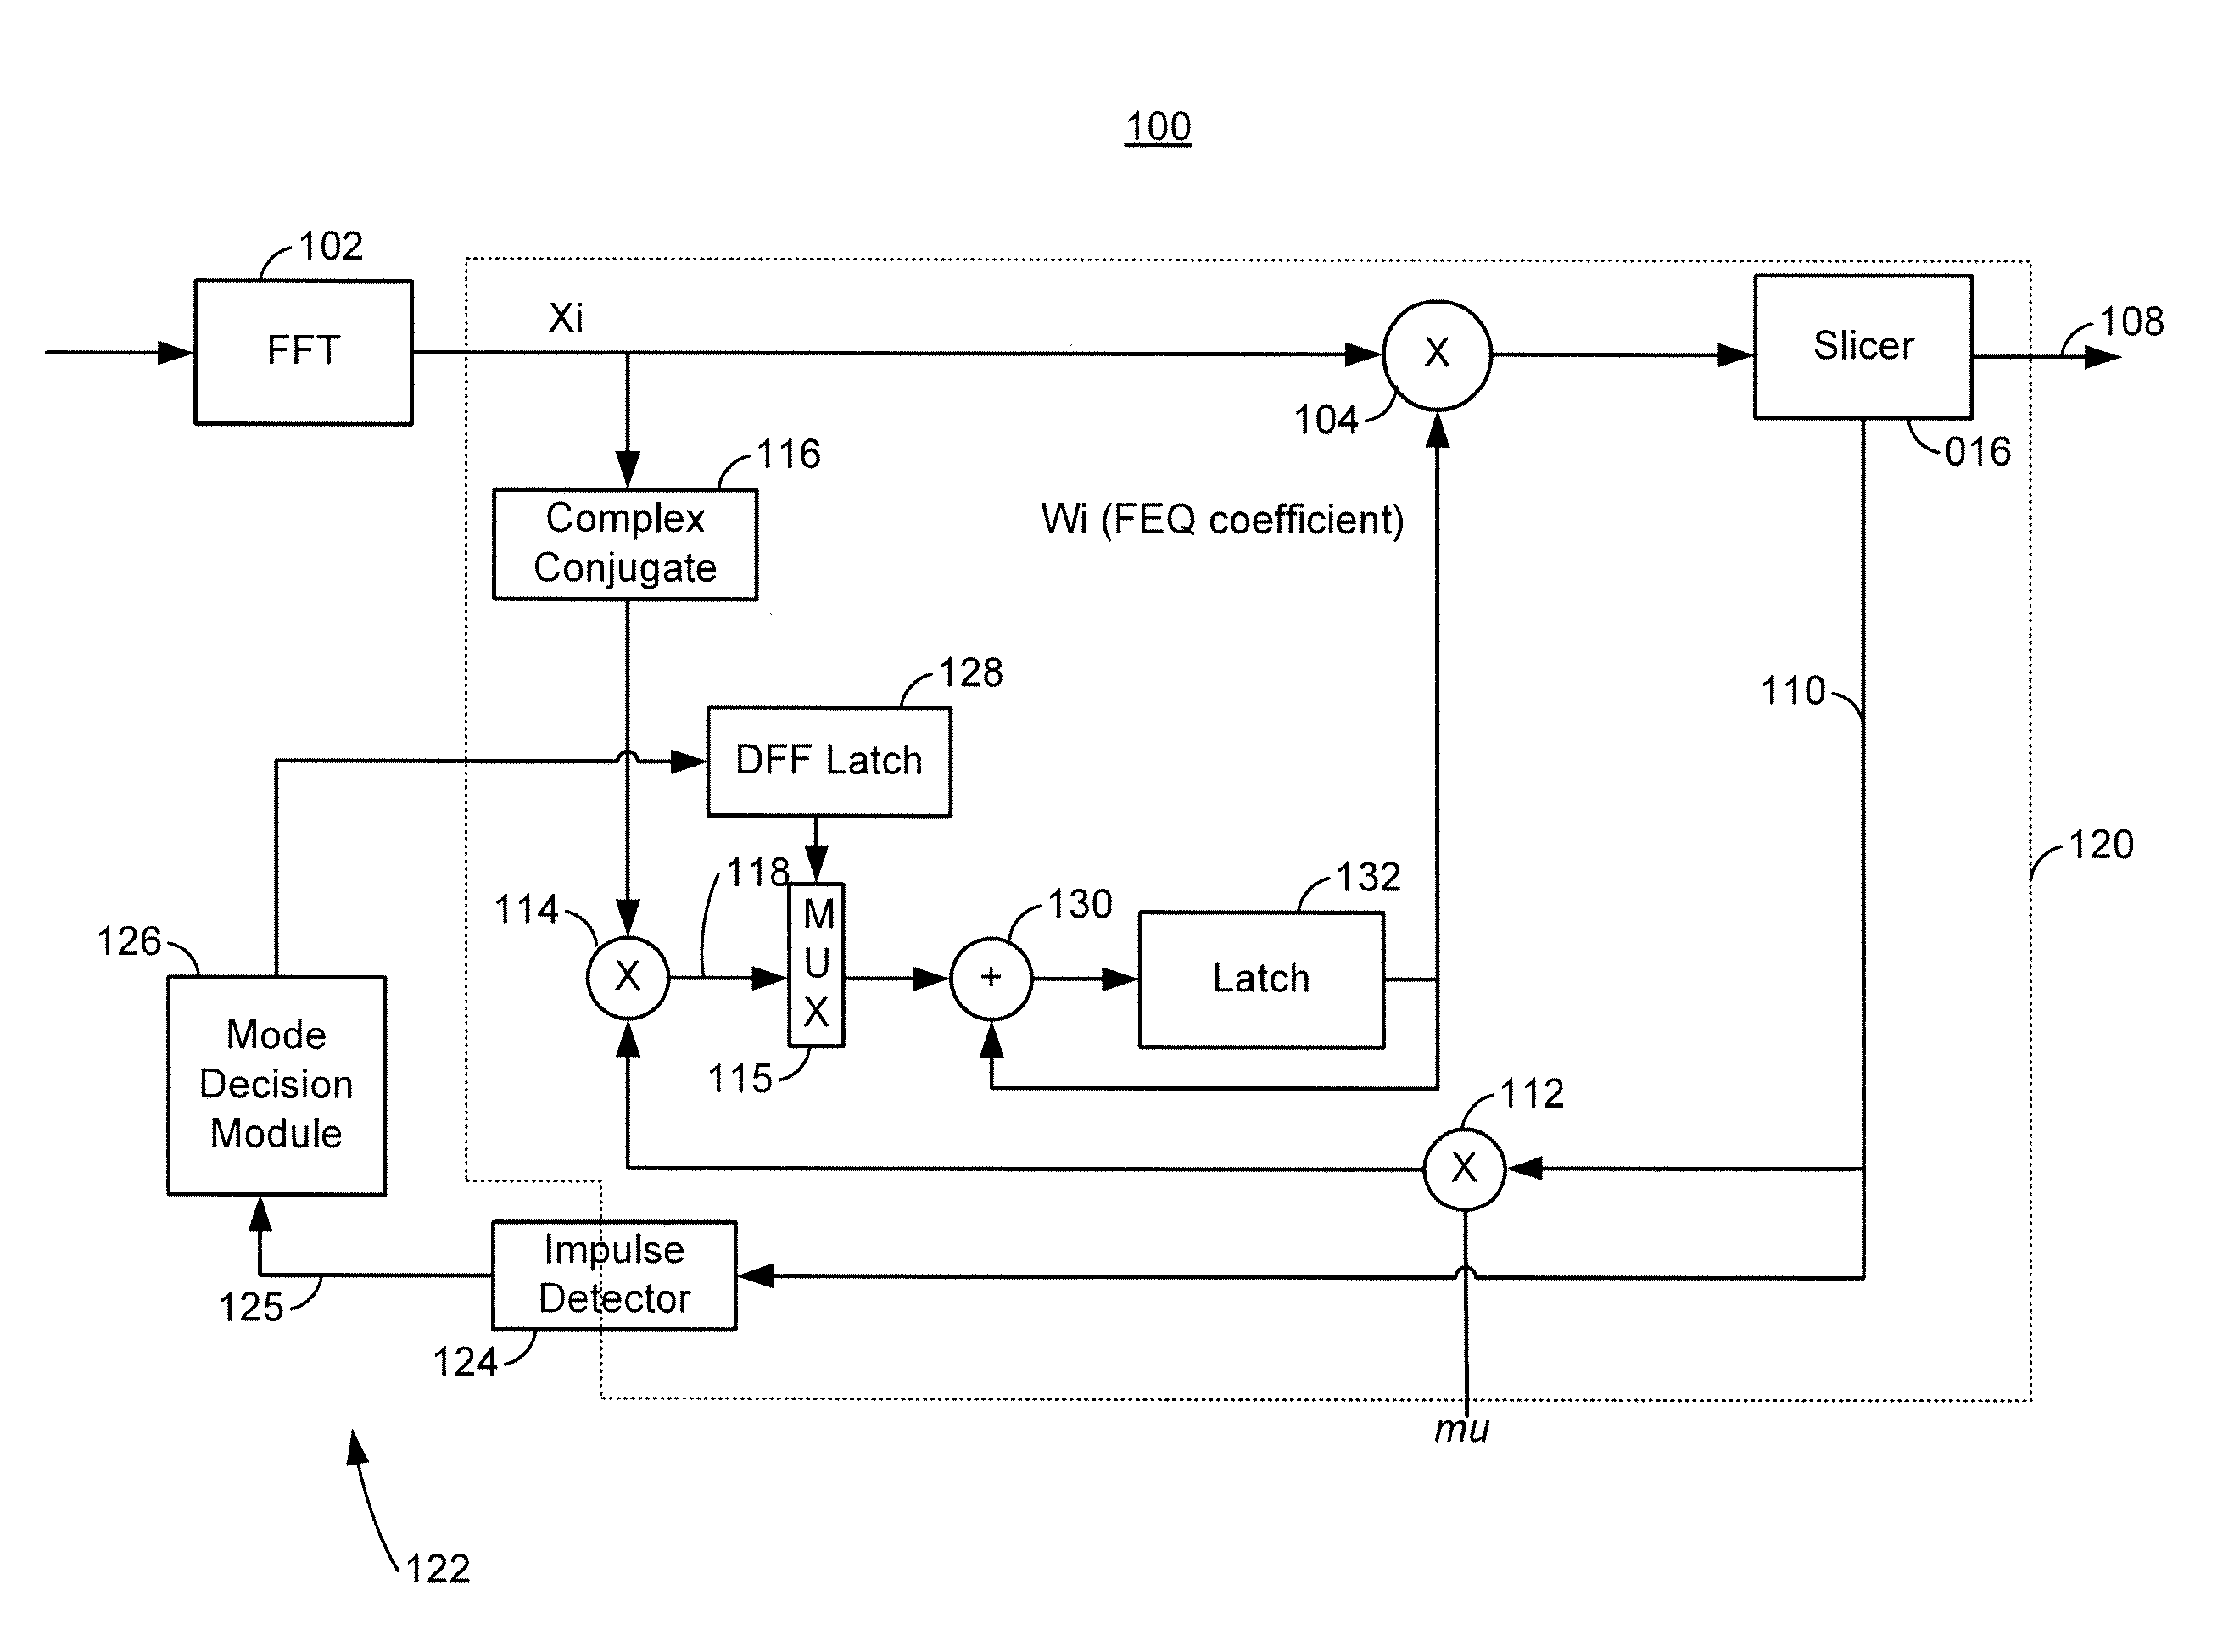 Wide band noise early detection and protection architecture for a frequency domain equalizer